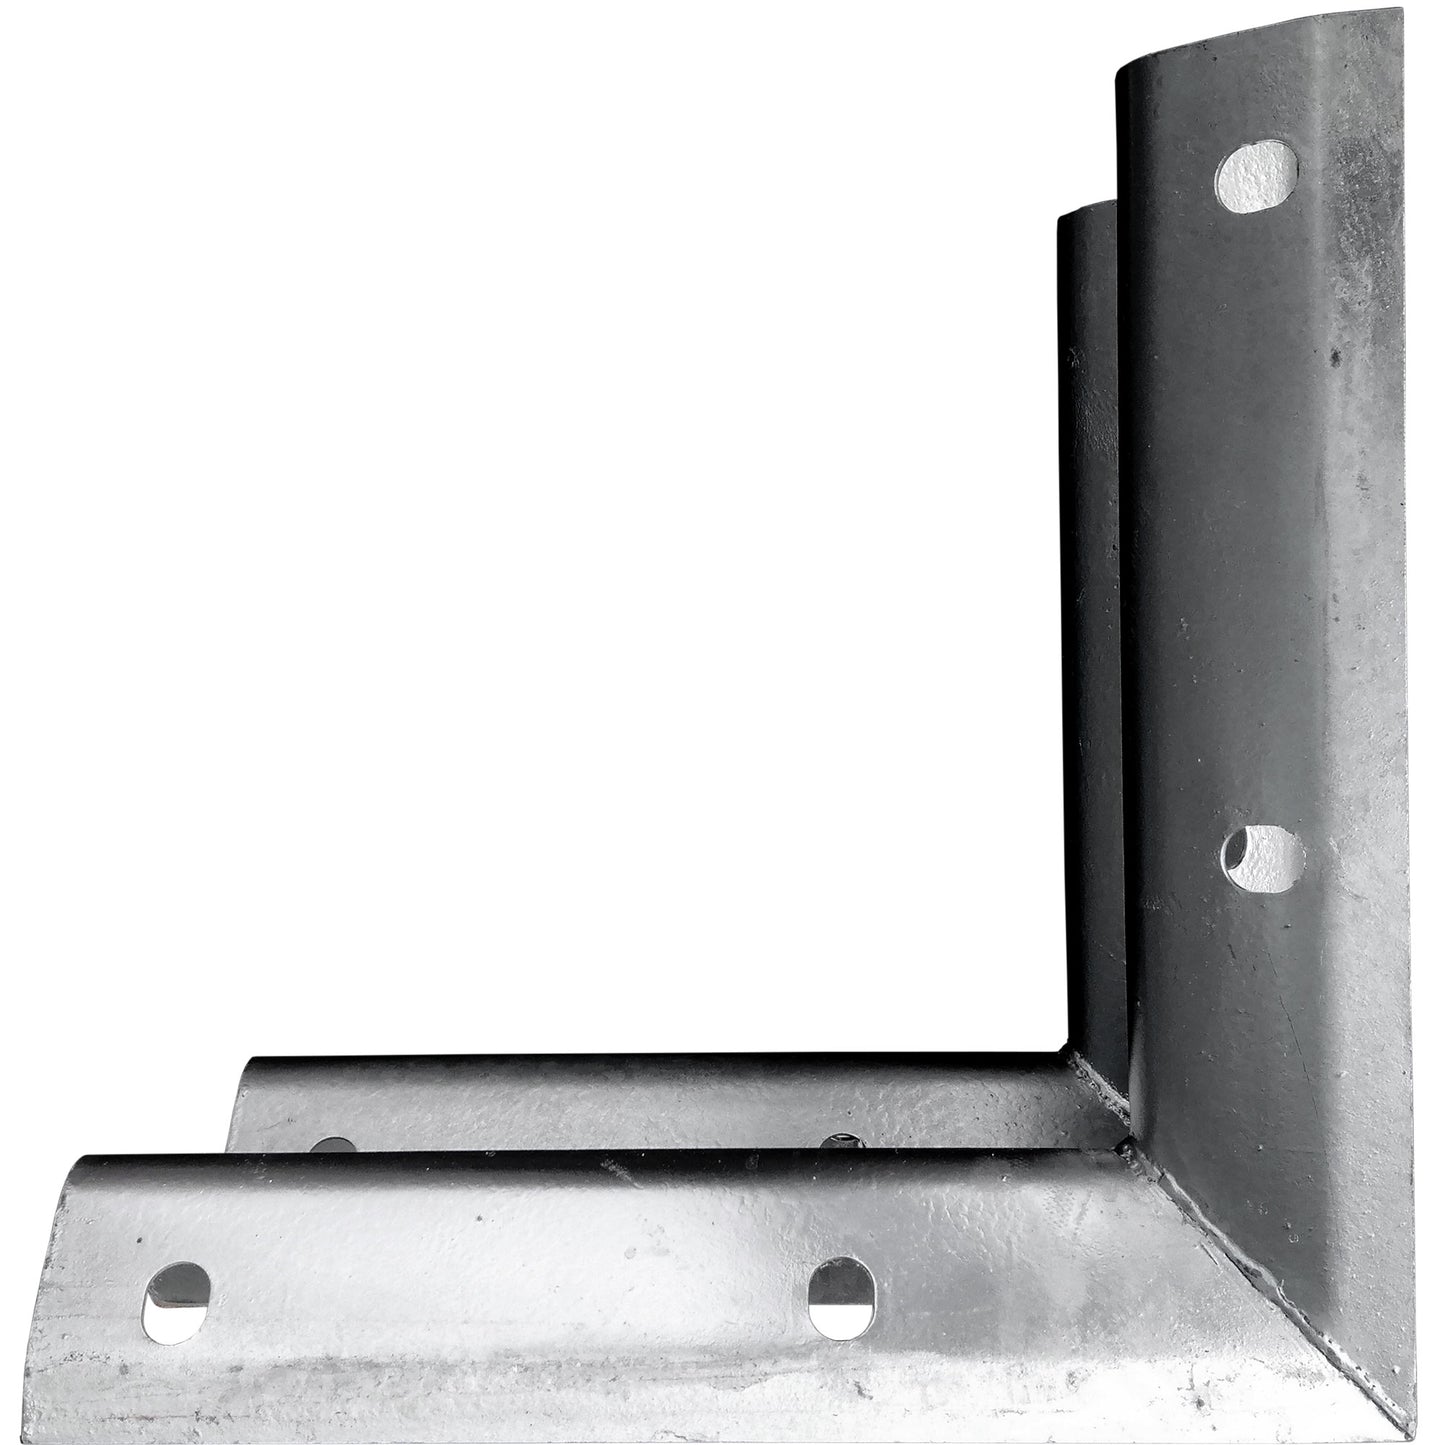 Clearance Crash Barrier Corners - 90° & 135° Inside & Outside Sections